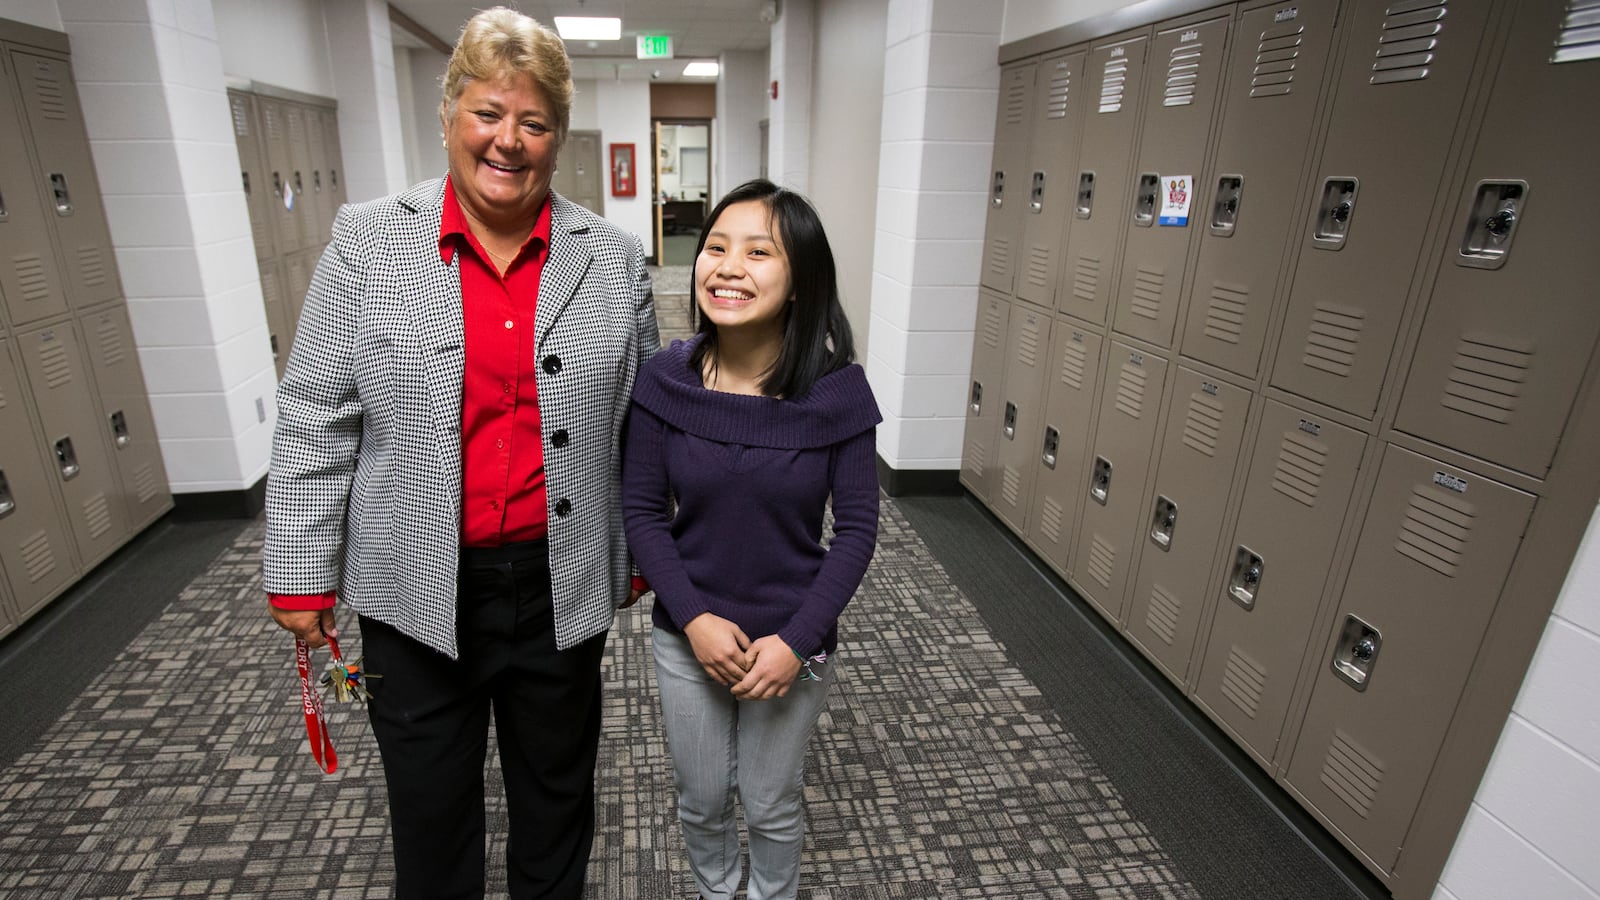 Barbara Brouwer, principal at Southport High School, poses for a photo with Elly Mawi, a senior at the school. Brouwer has been instrumental in leading the school as its English language learner population has grown.